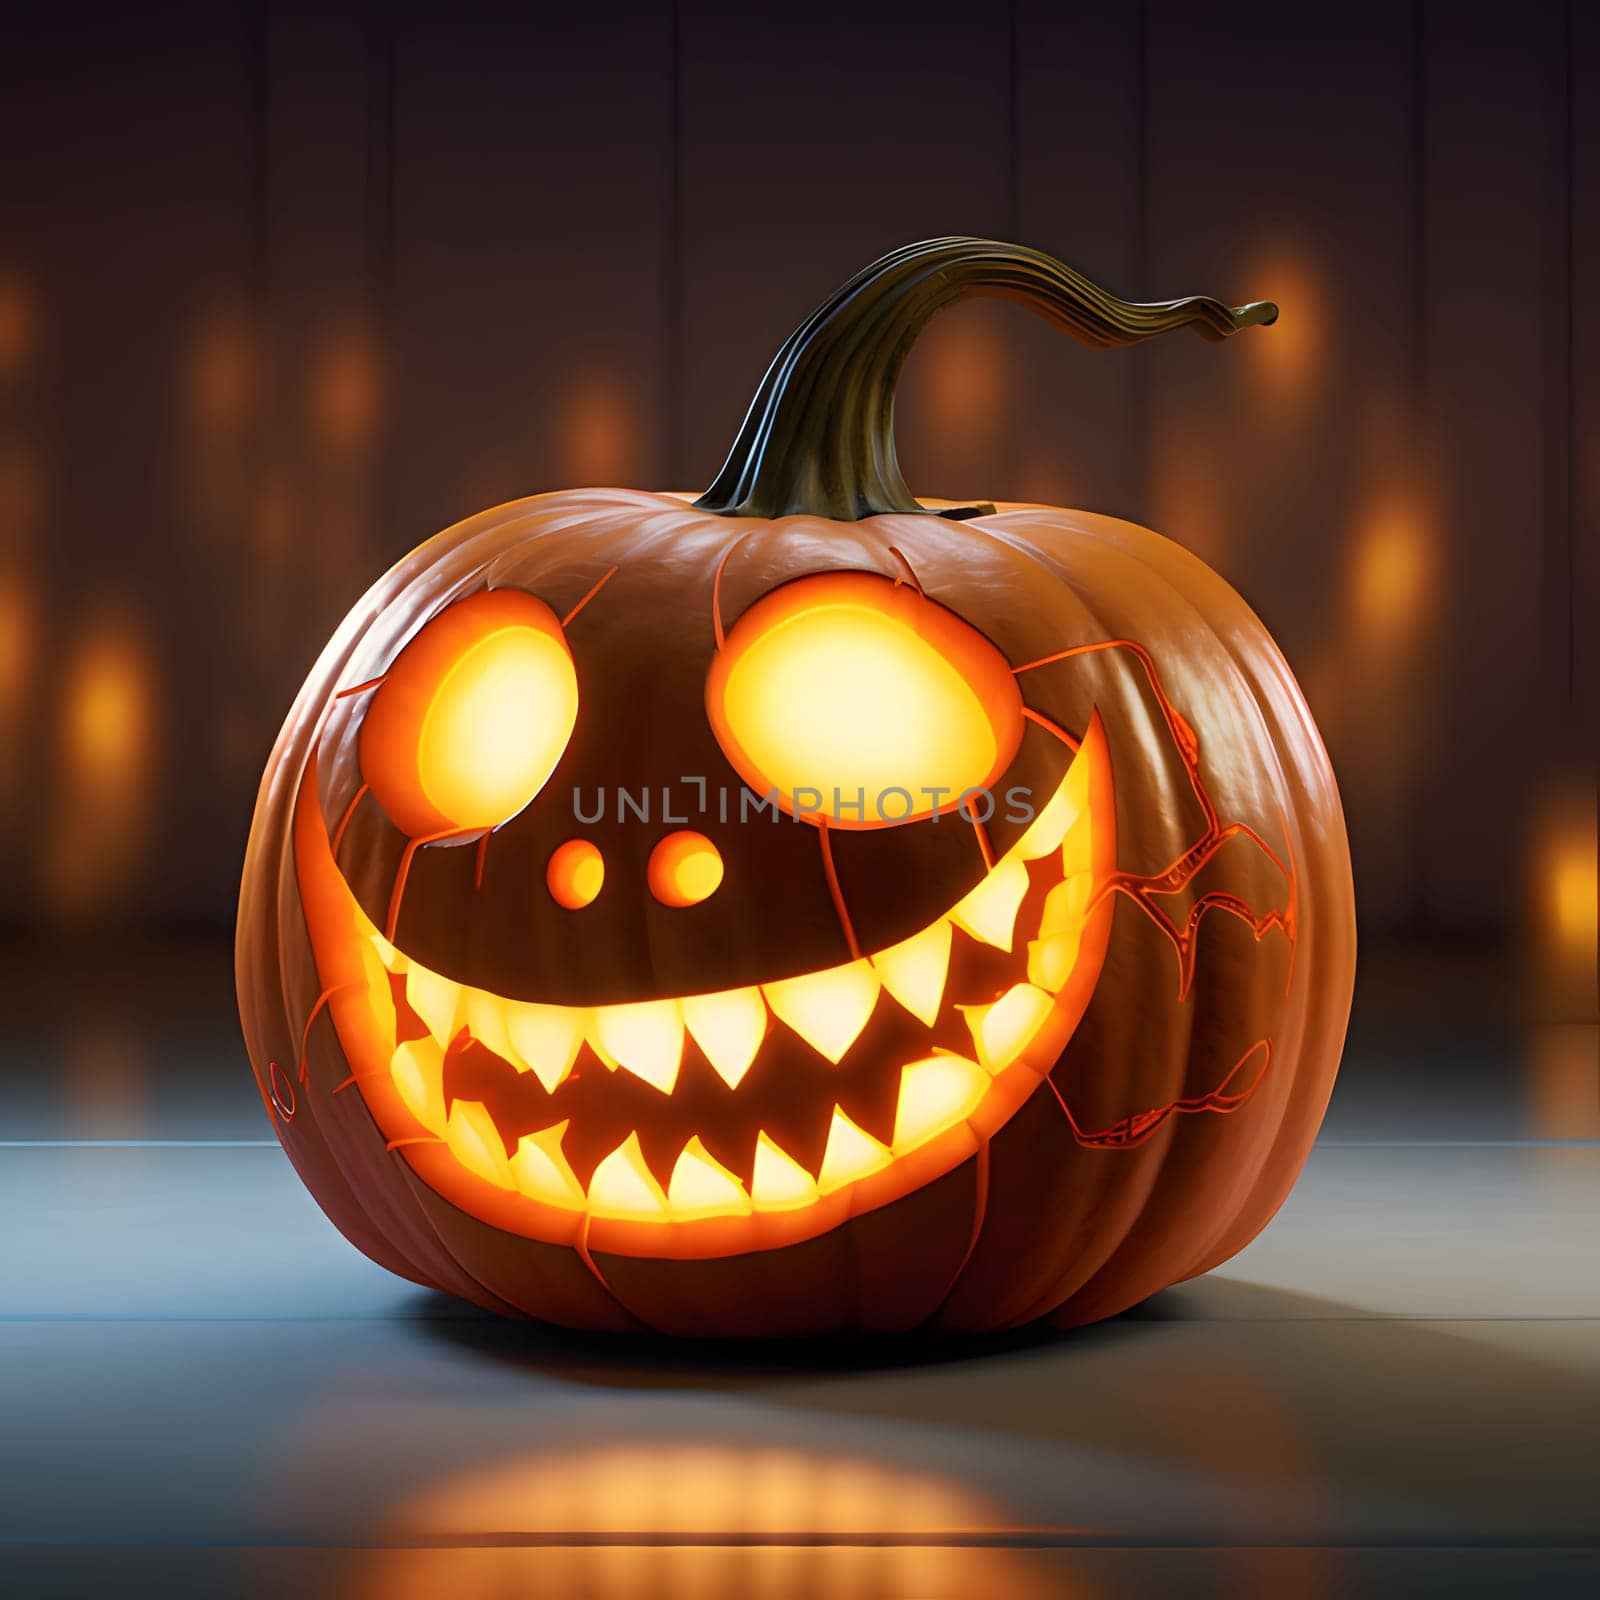 Giant glowing gouged jack-o-lantern pumpkin on a solid background, a Halloween image. Atmosphere of darkness and fear.